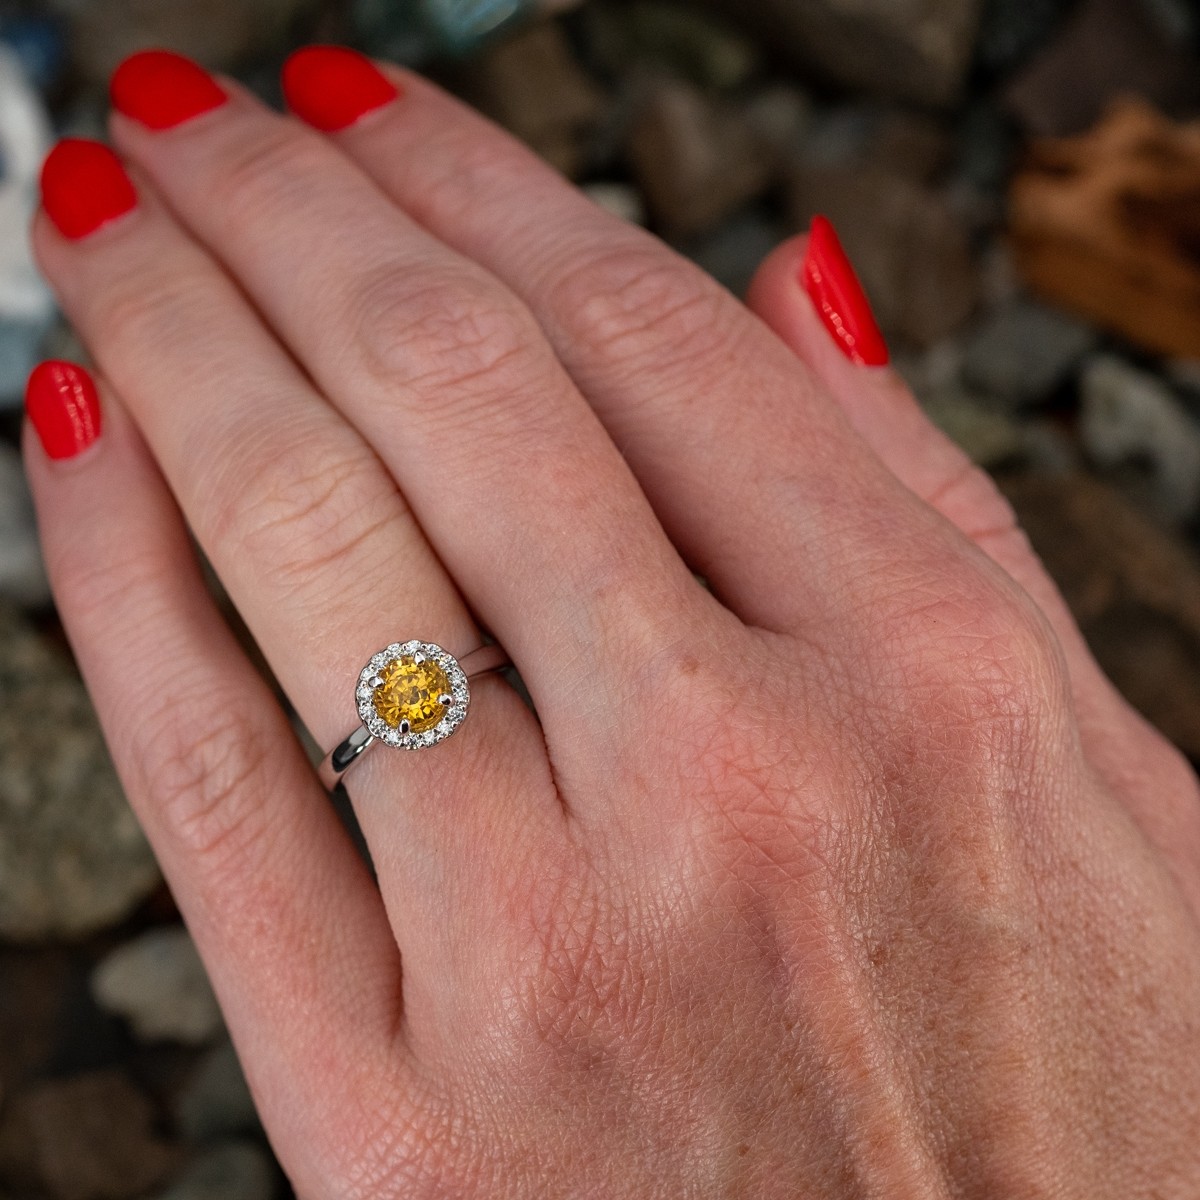 The Dazzling Prong Yellow Sapphire Ring-nlmtdanang.com.vn